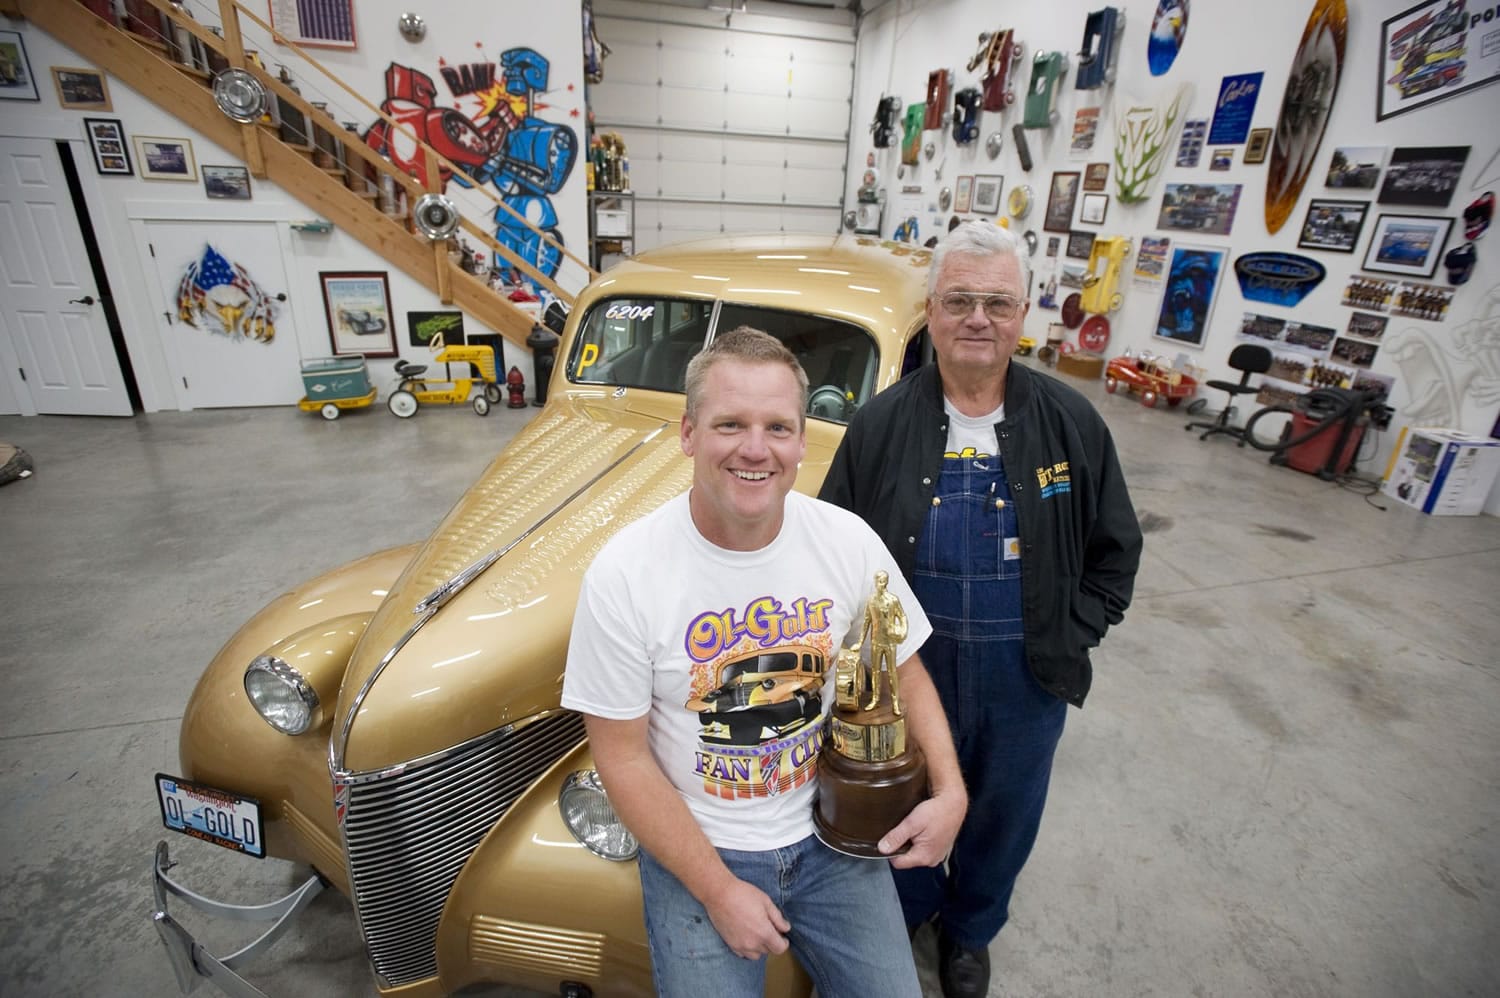 Paul Comeau, left, and his dad Bob Comeau of Comeau Racing, shown with Ol' Gold -- a 1939 Chevrolet sedan.